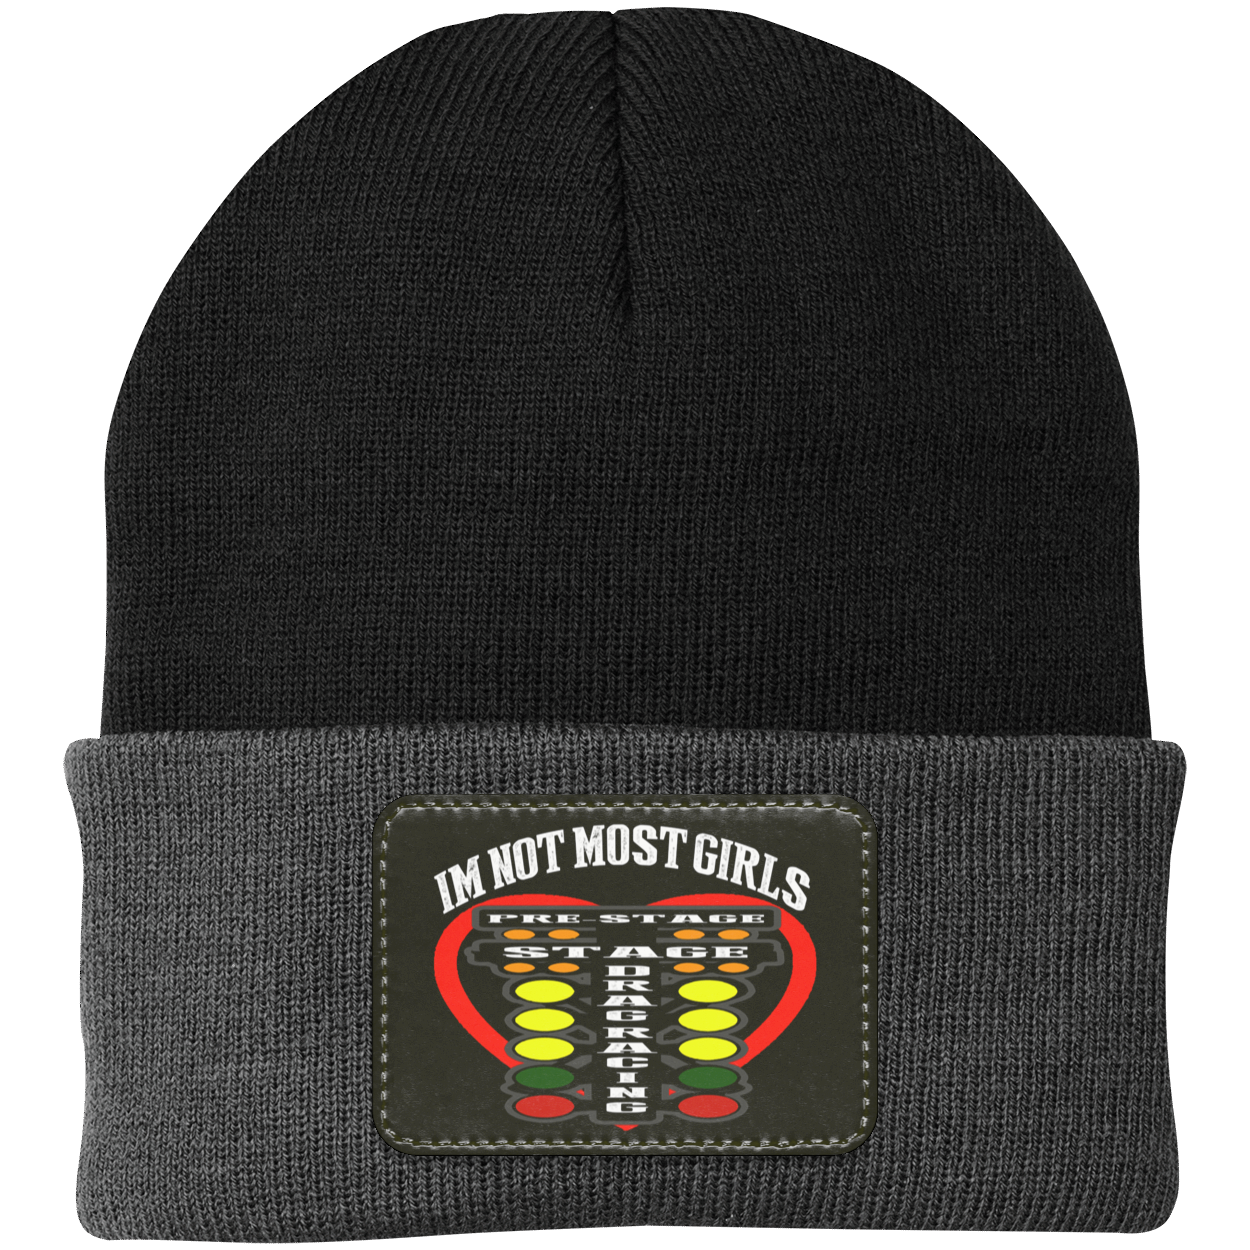 I'm Not Most Girls Drag Racing Knit Cap - Patch